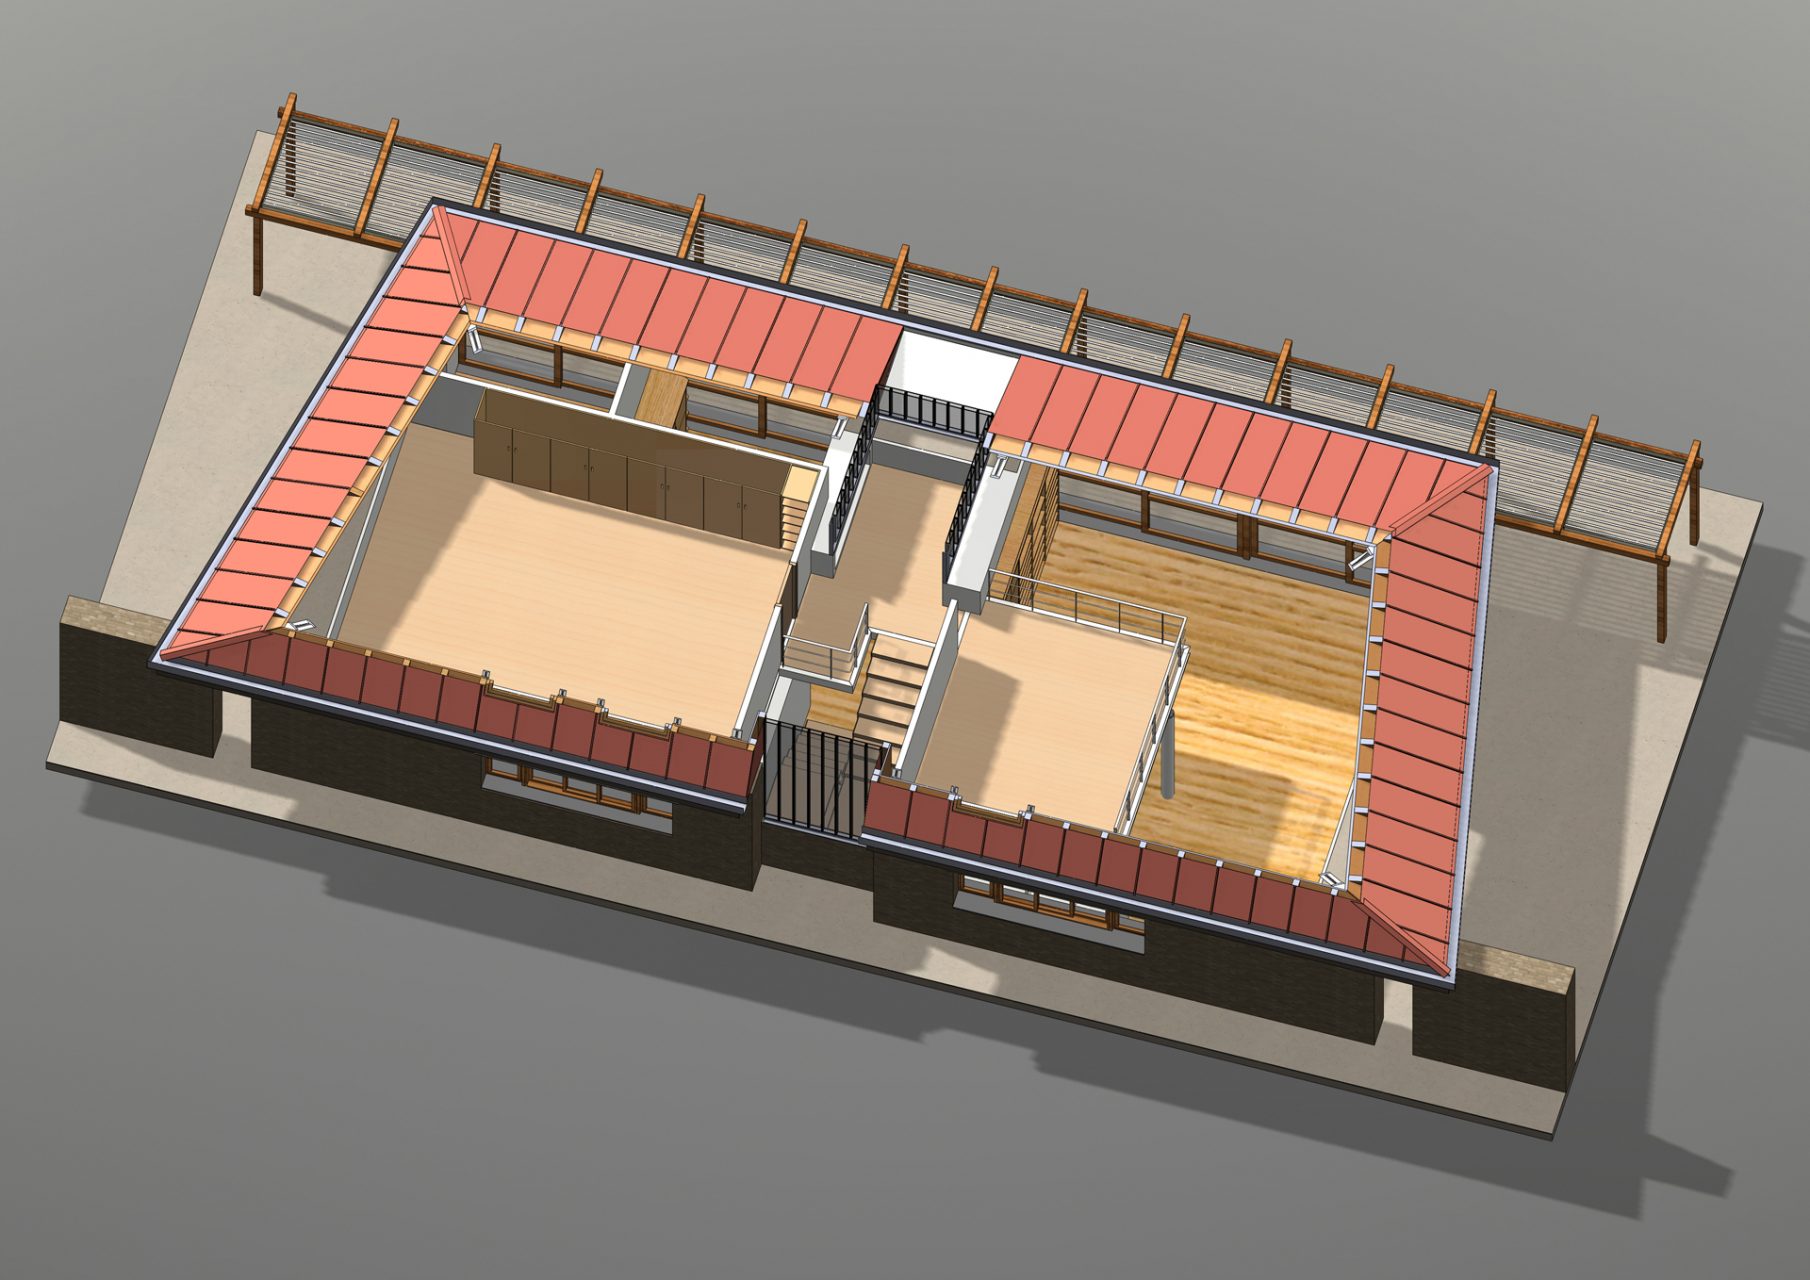 KL HOUSE 12 - axonometric plan - first floor - sectioned model F